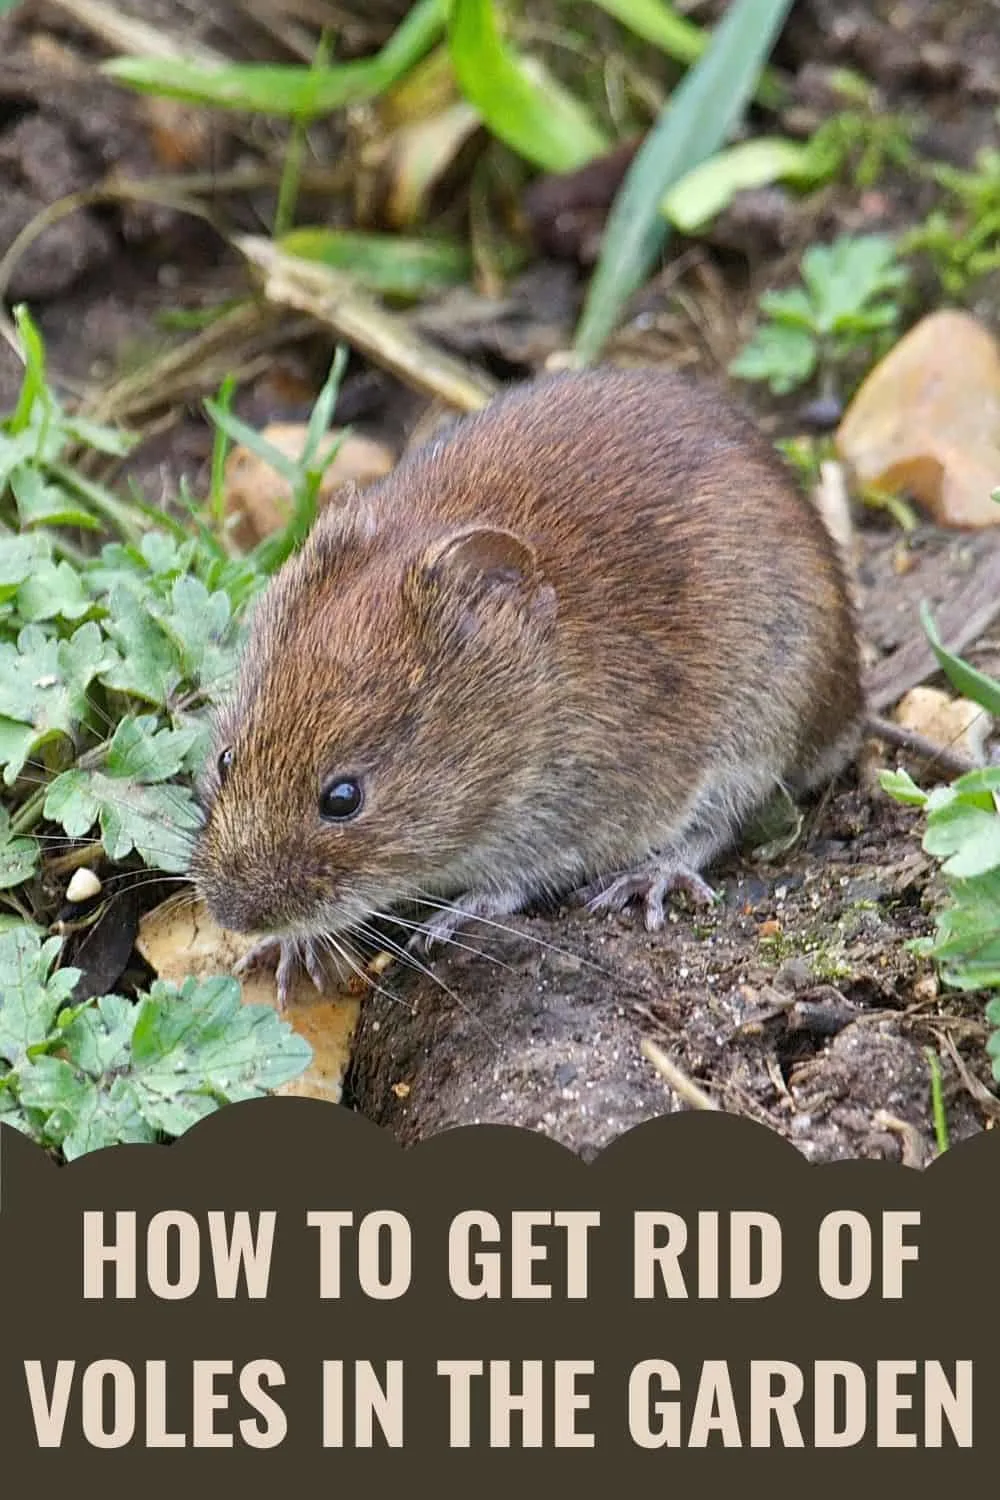 How to get rid of voles in the garden